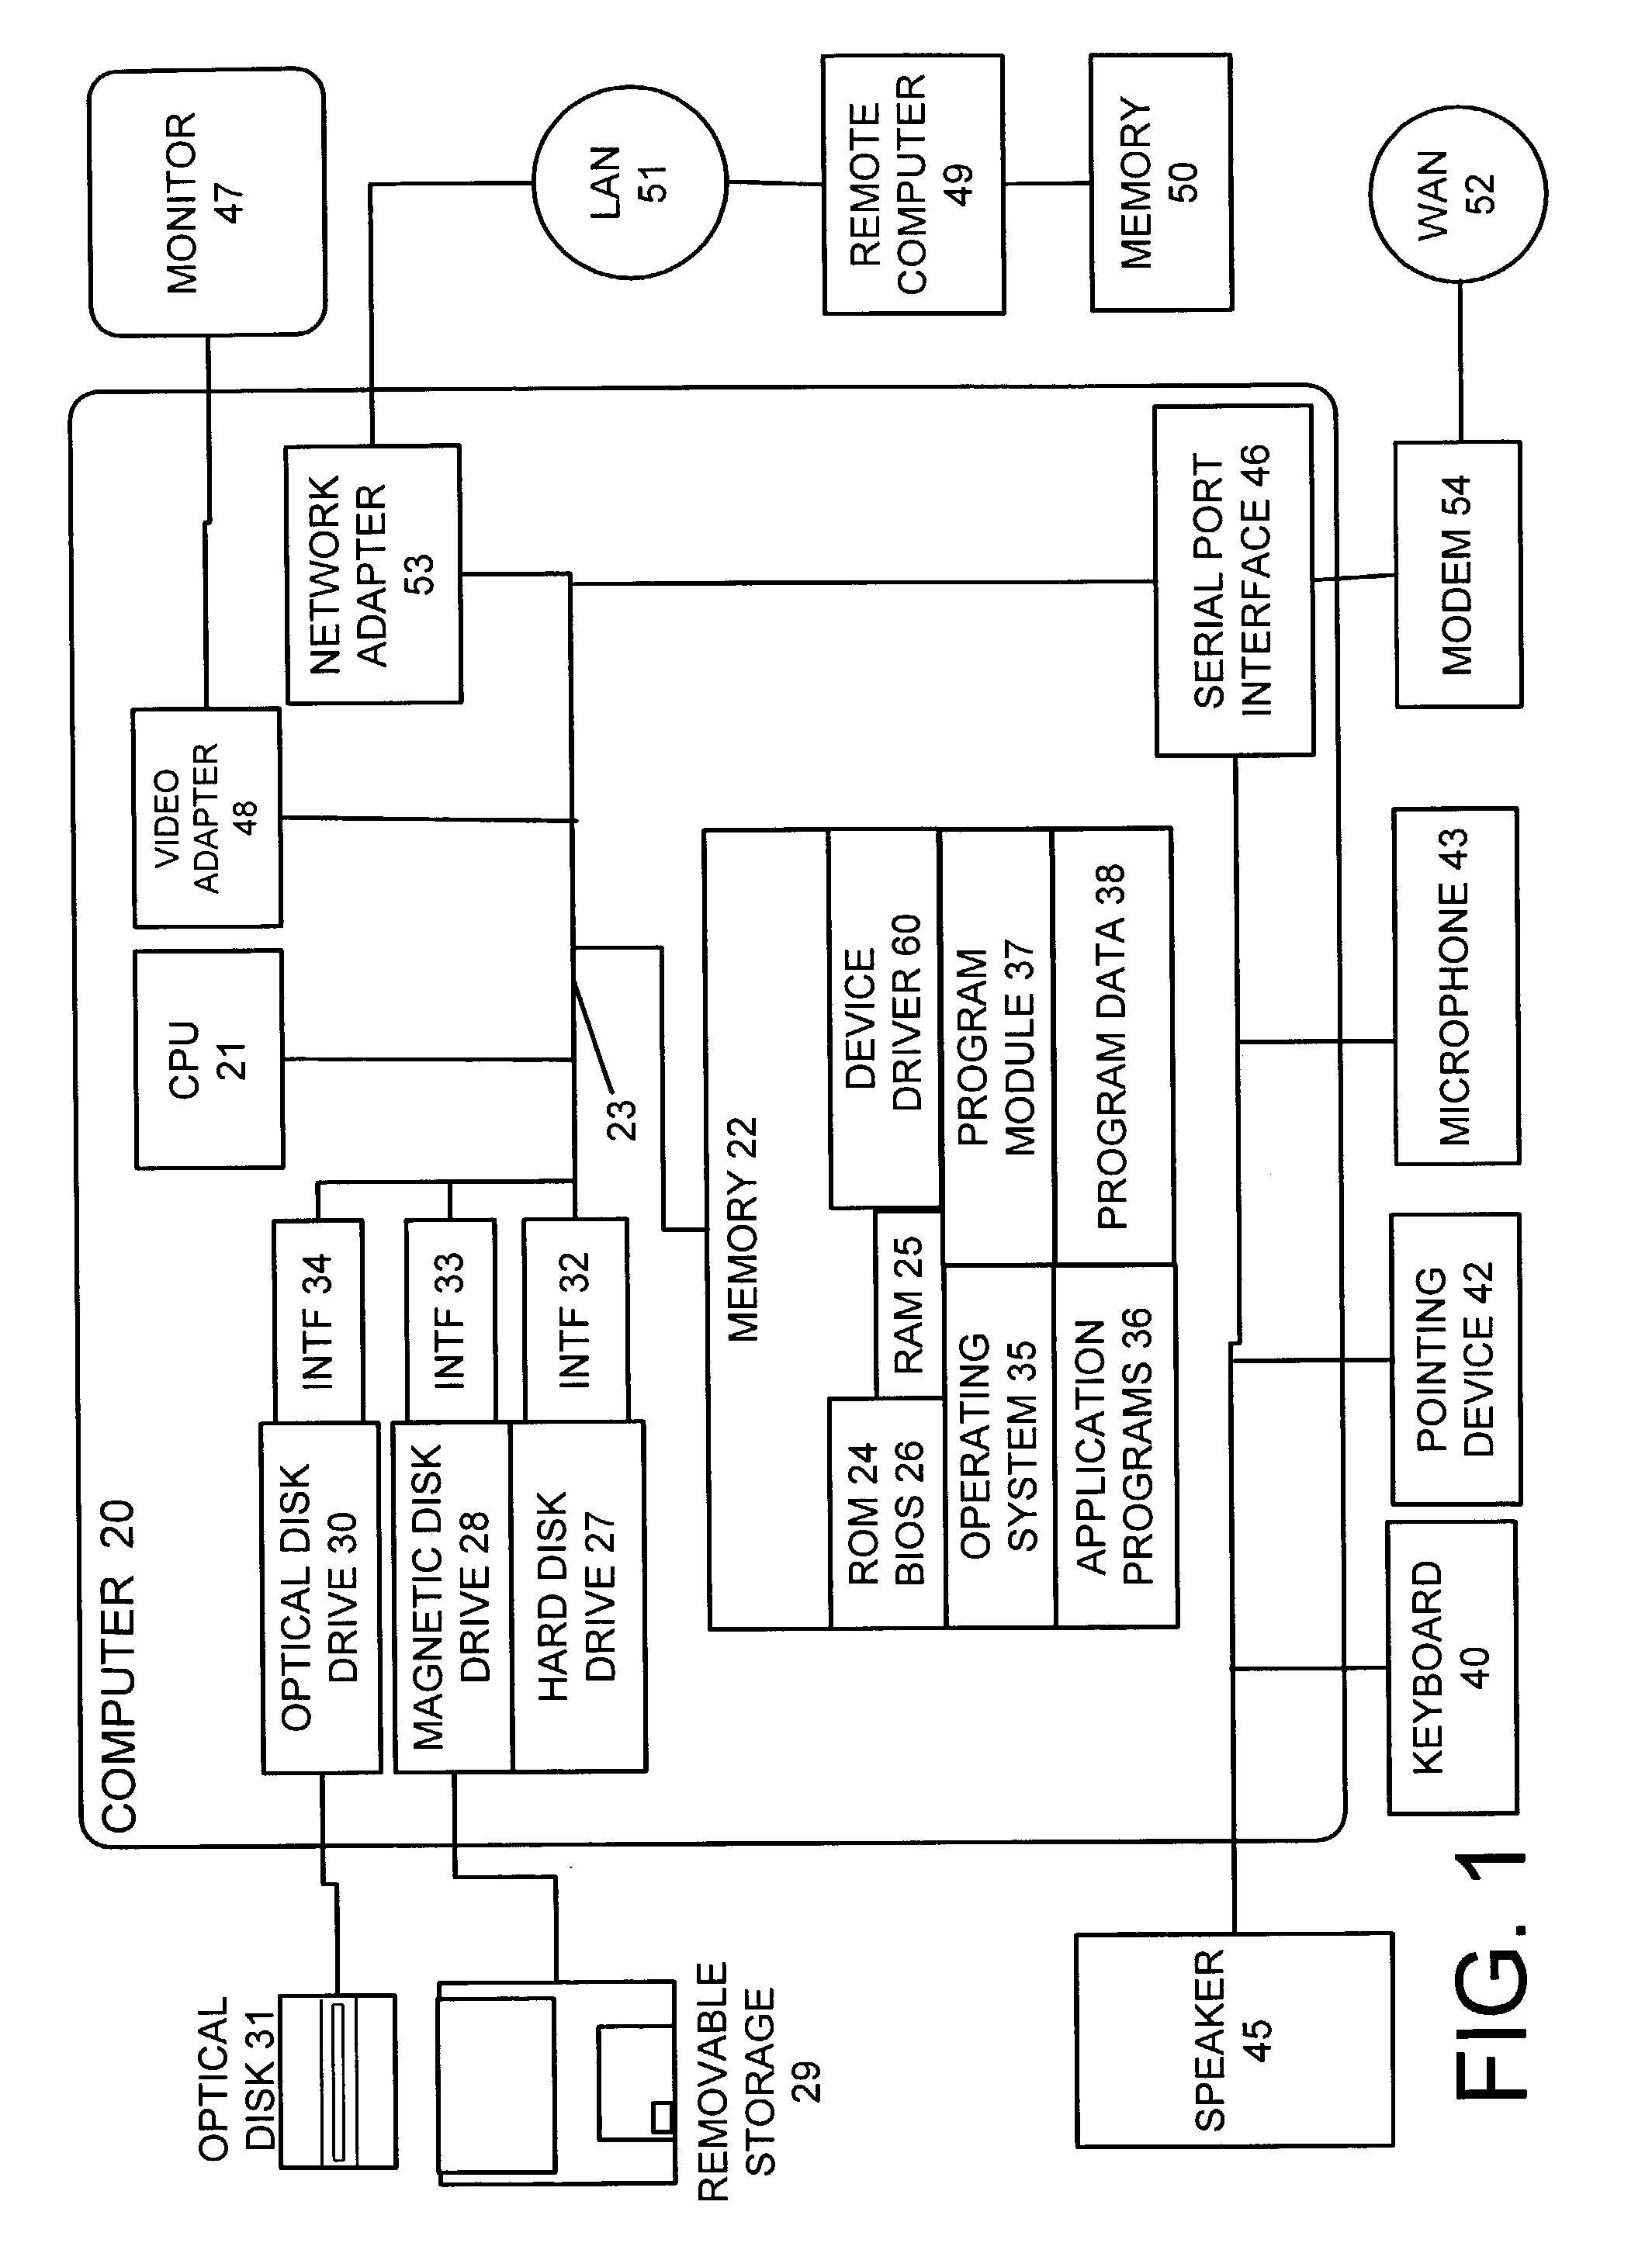 Statistical method and apparatus for learning translation relationships among phrases